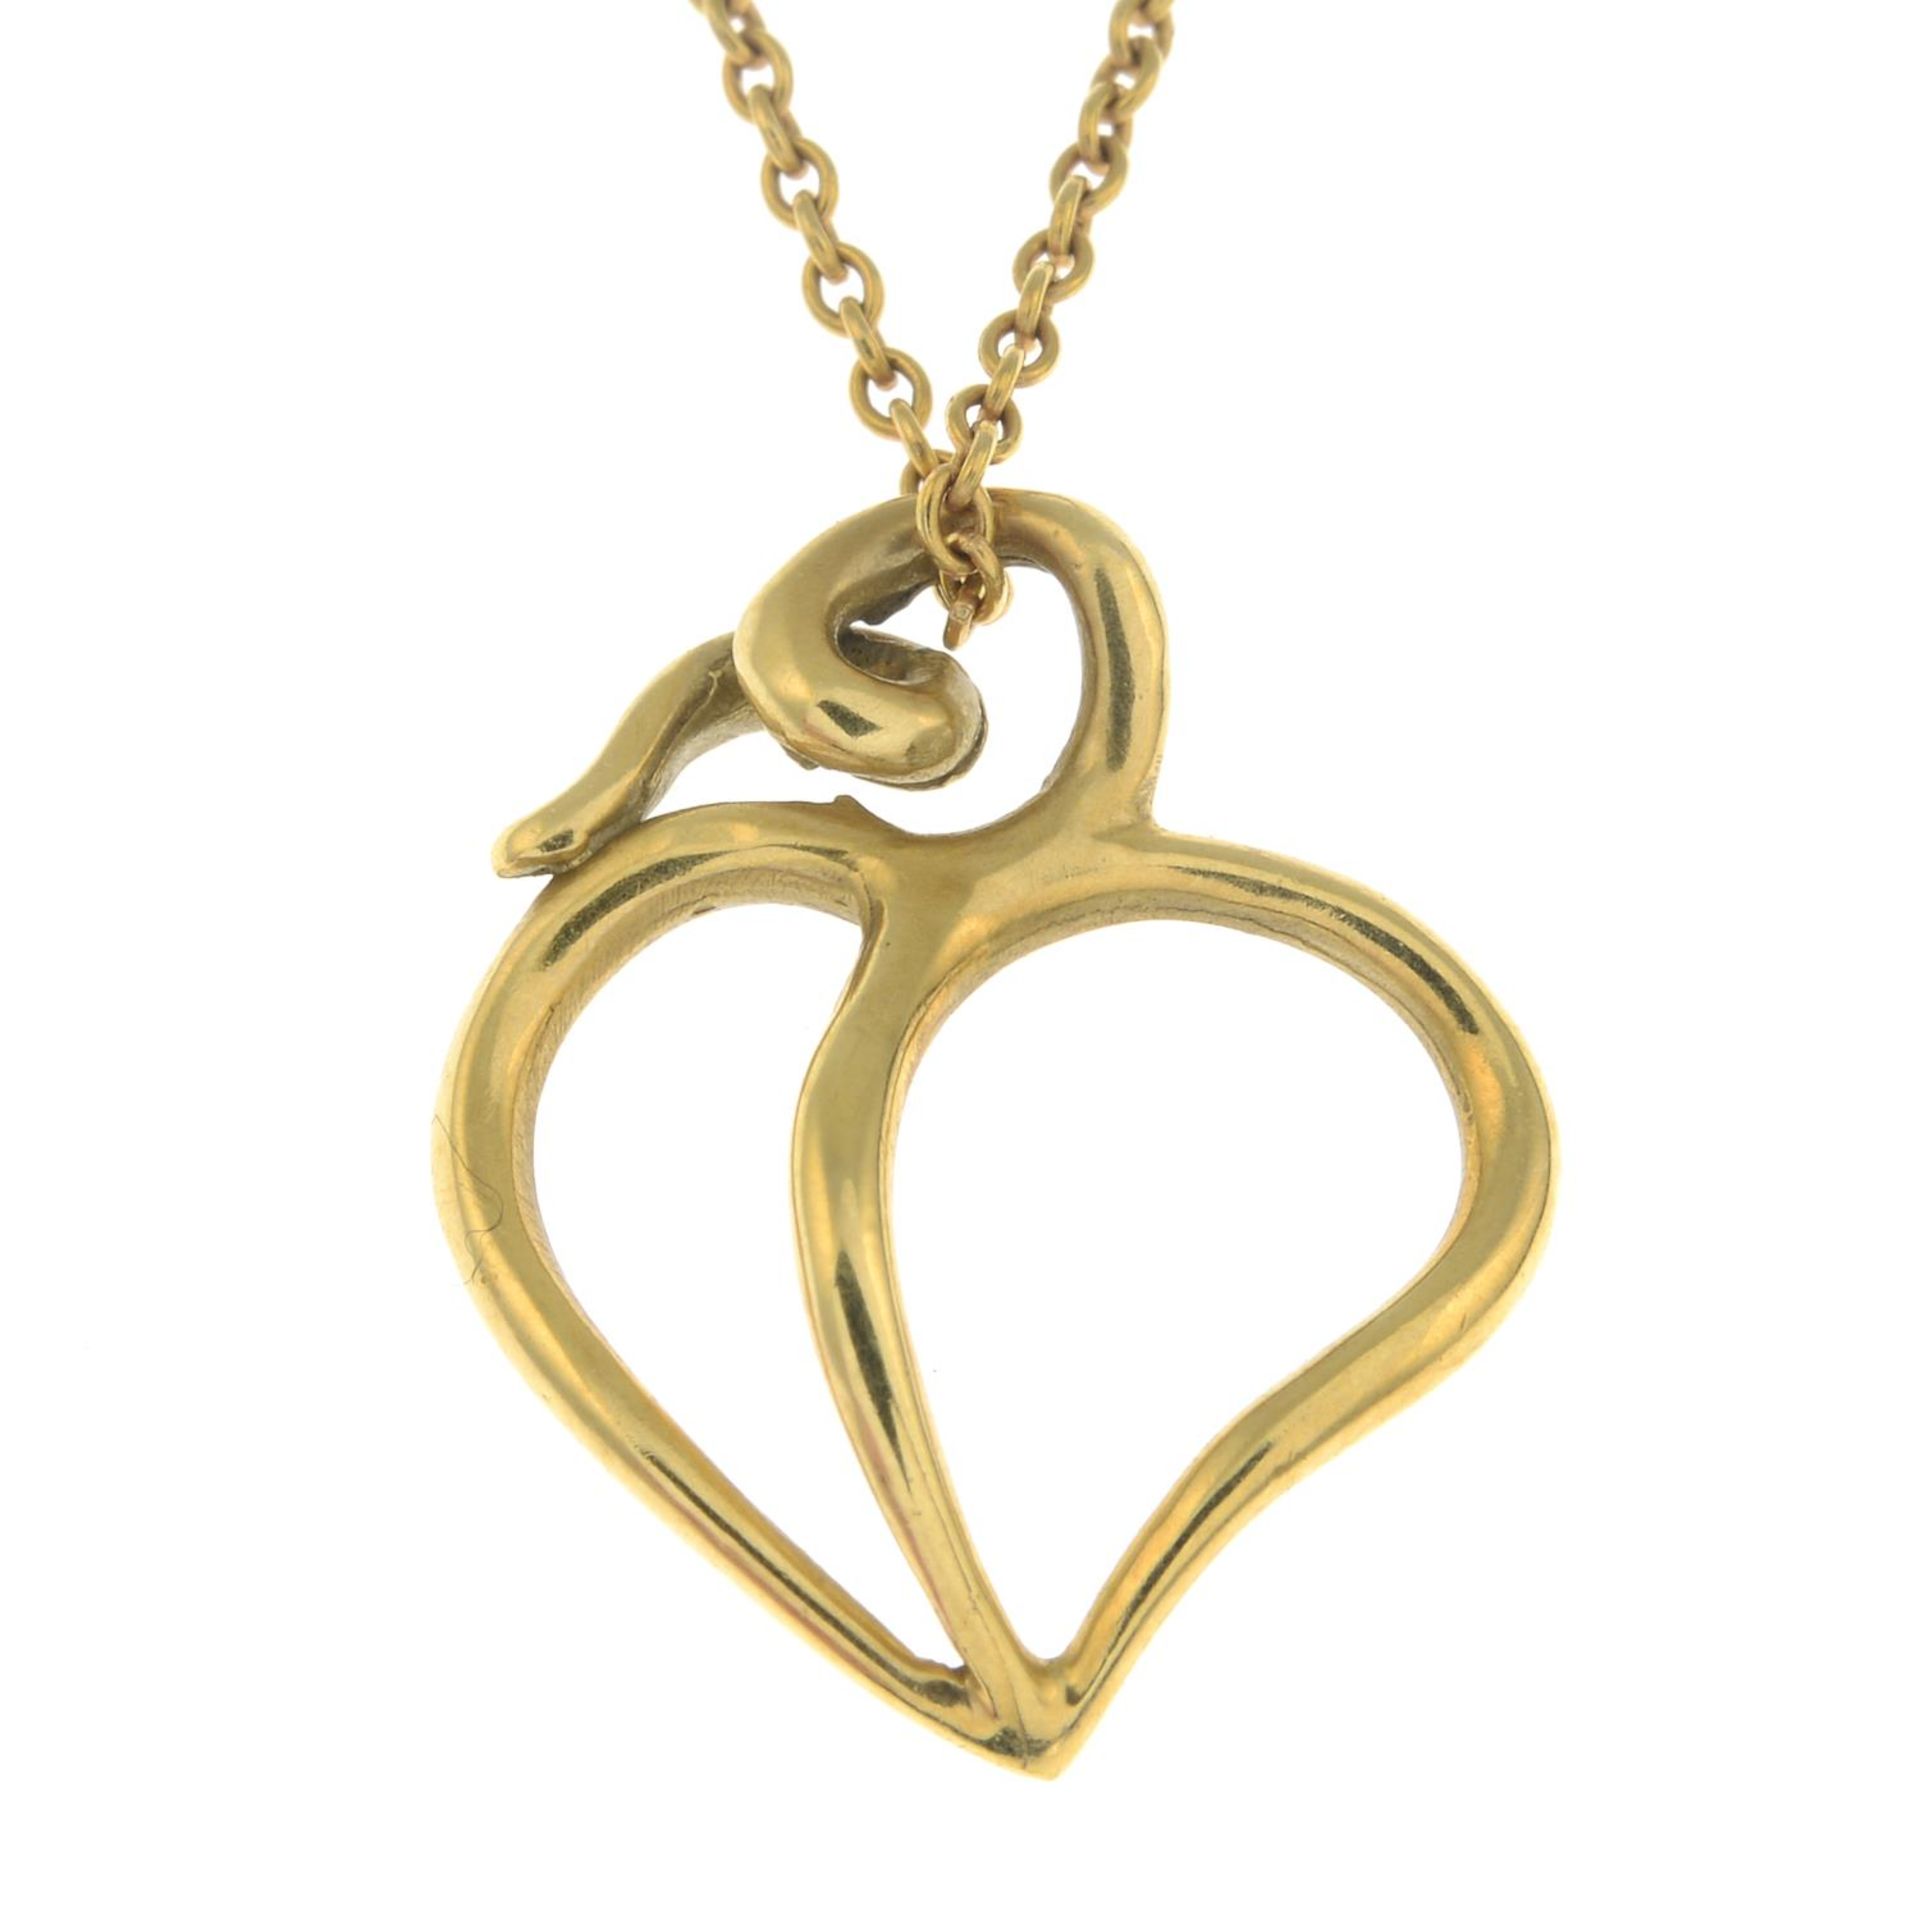 A '1980' pendant with chain, by Paloma Picasso for Tiffany & Co.Pendant signed 1980 Tiffany & Co.